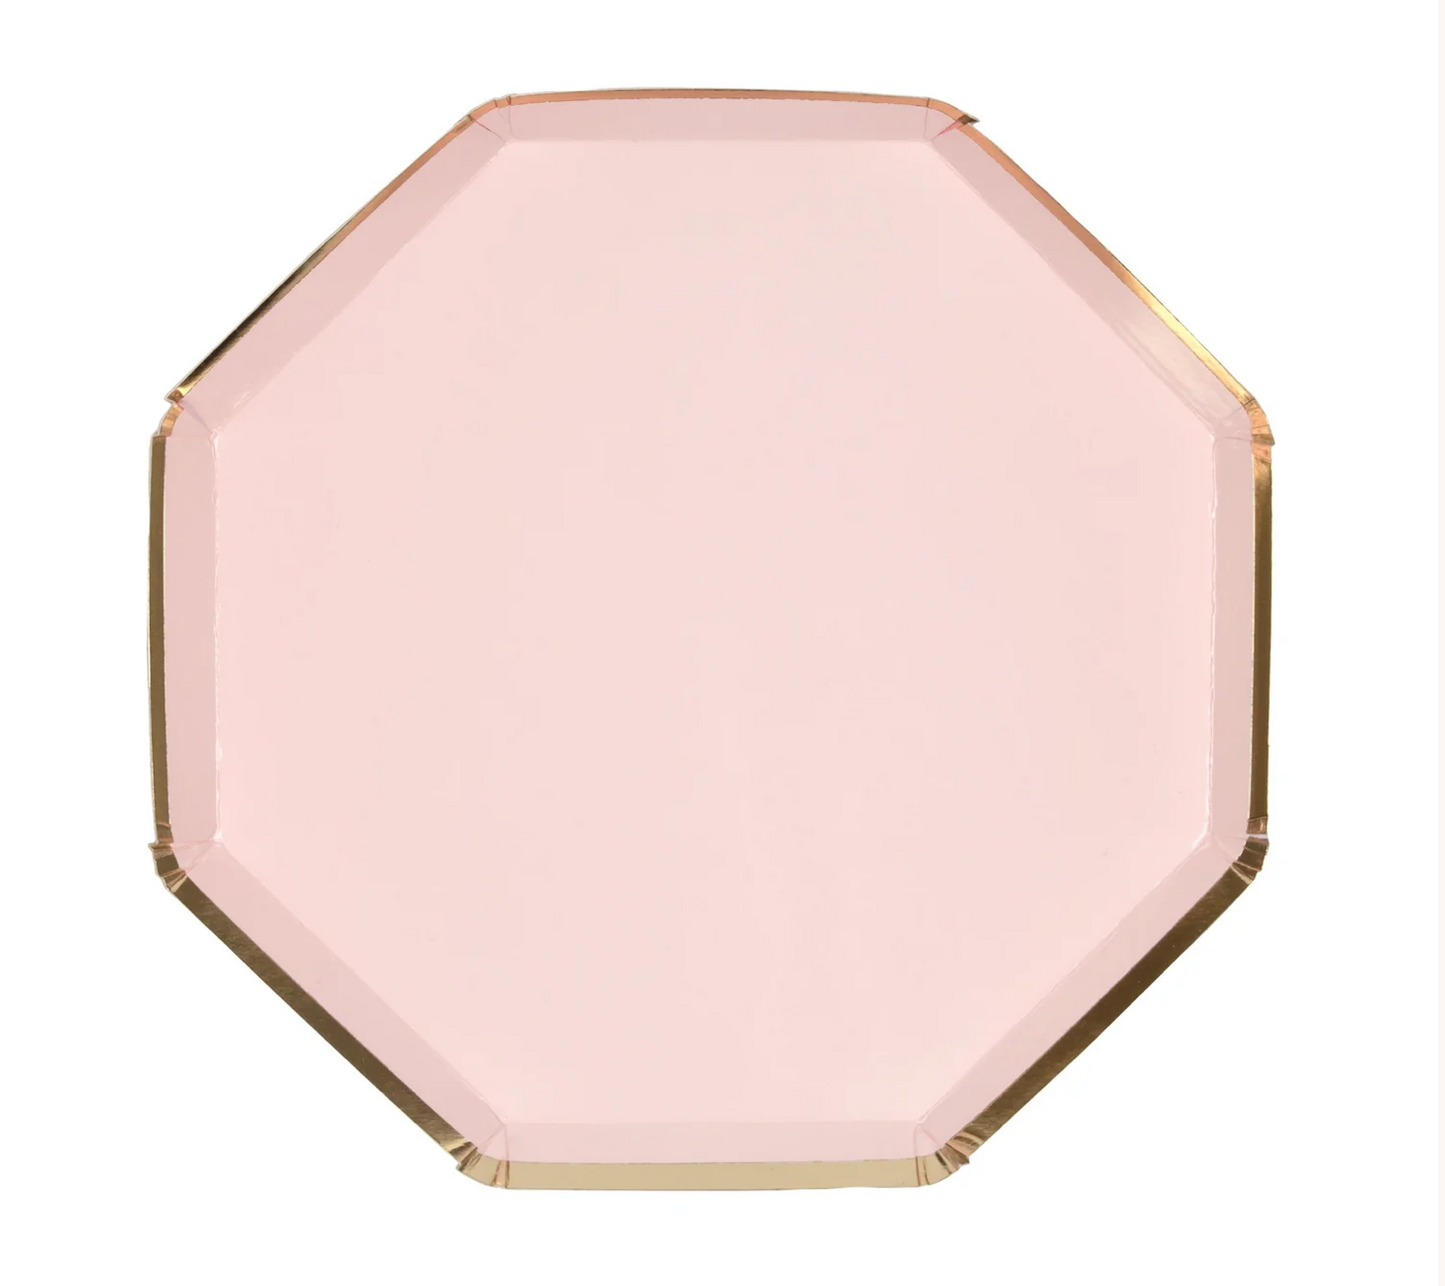 Dusty Pink Small Octagonal Plate